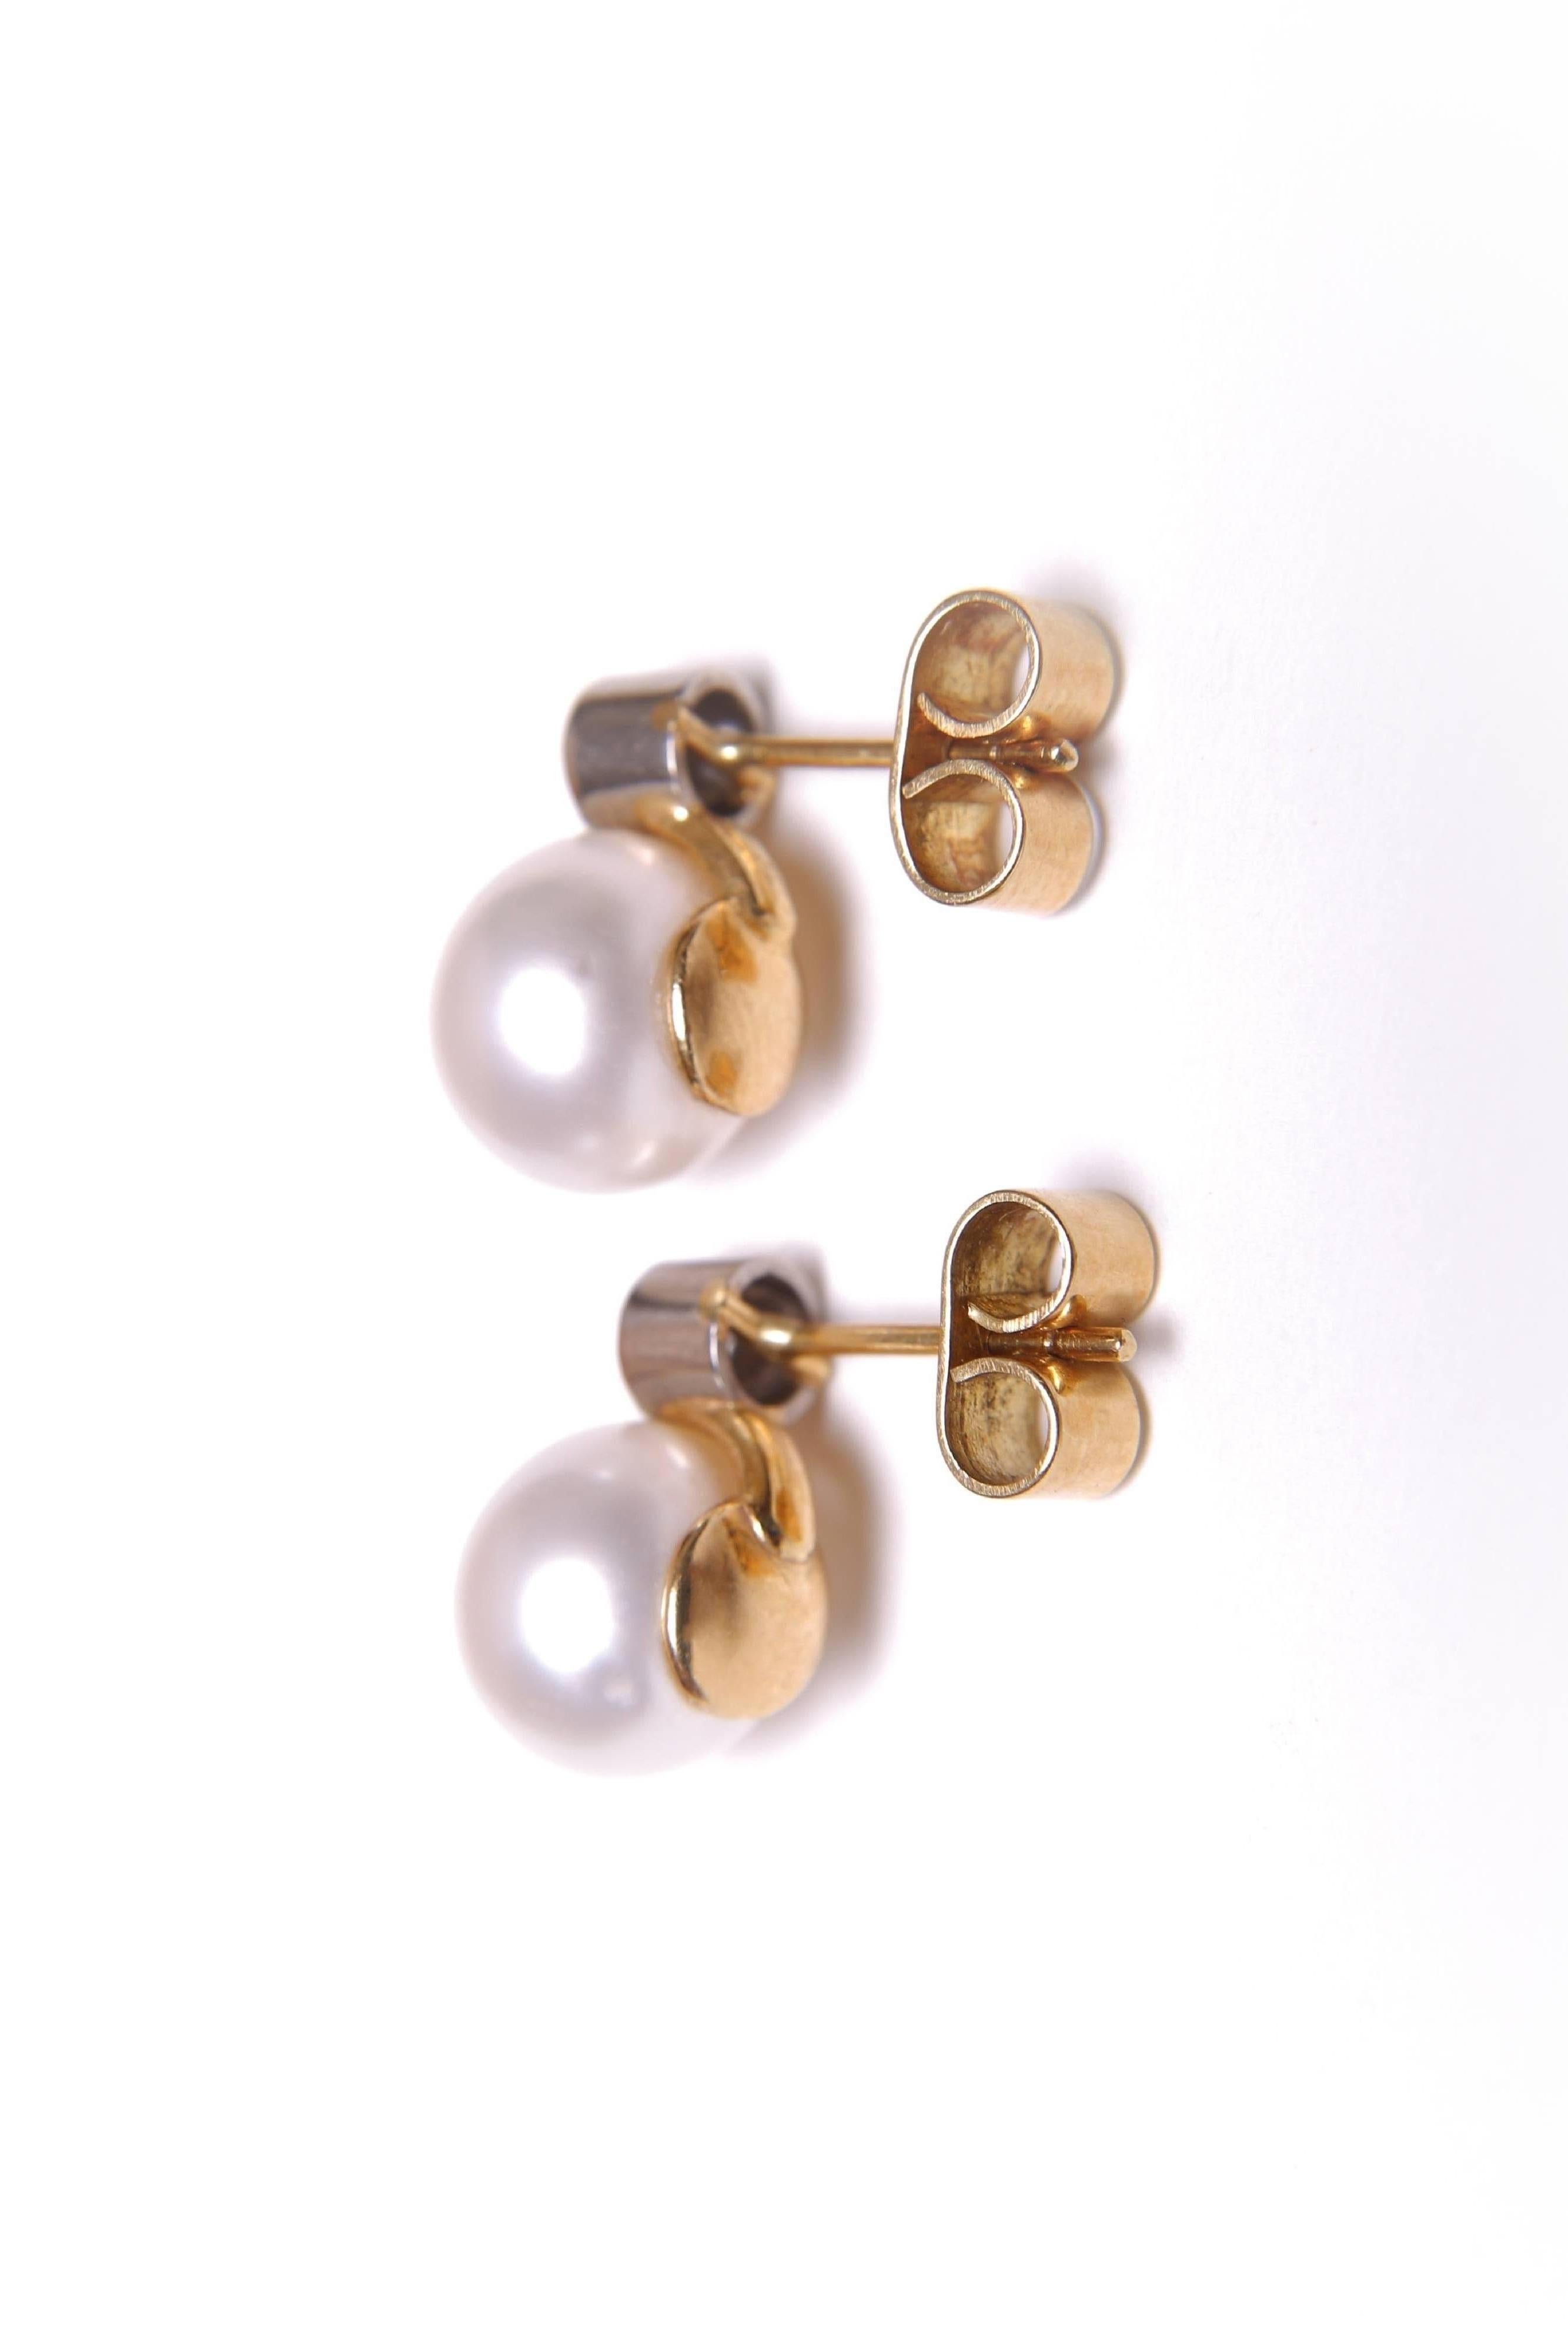 A pair of diamond and cultured pearl two stone stone earrings. The two round brilliant cut diamonds weigh a total of approximately 0.50 carats and the two cultured pearls approxiamately are 10mm diameter each. The metal is 18 carat yellow and white